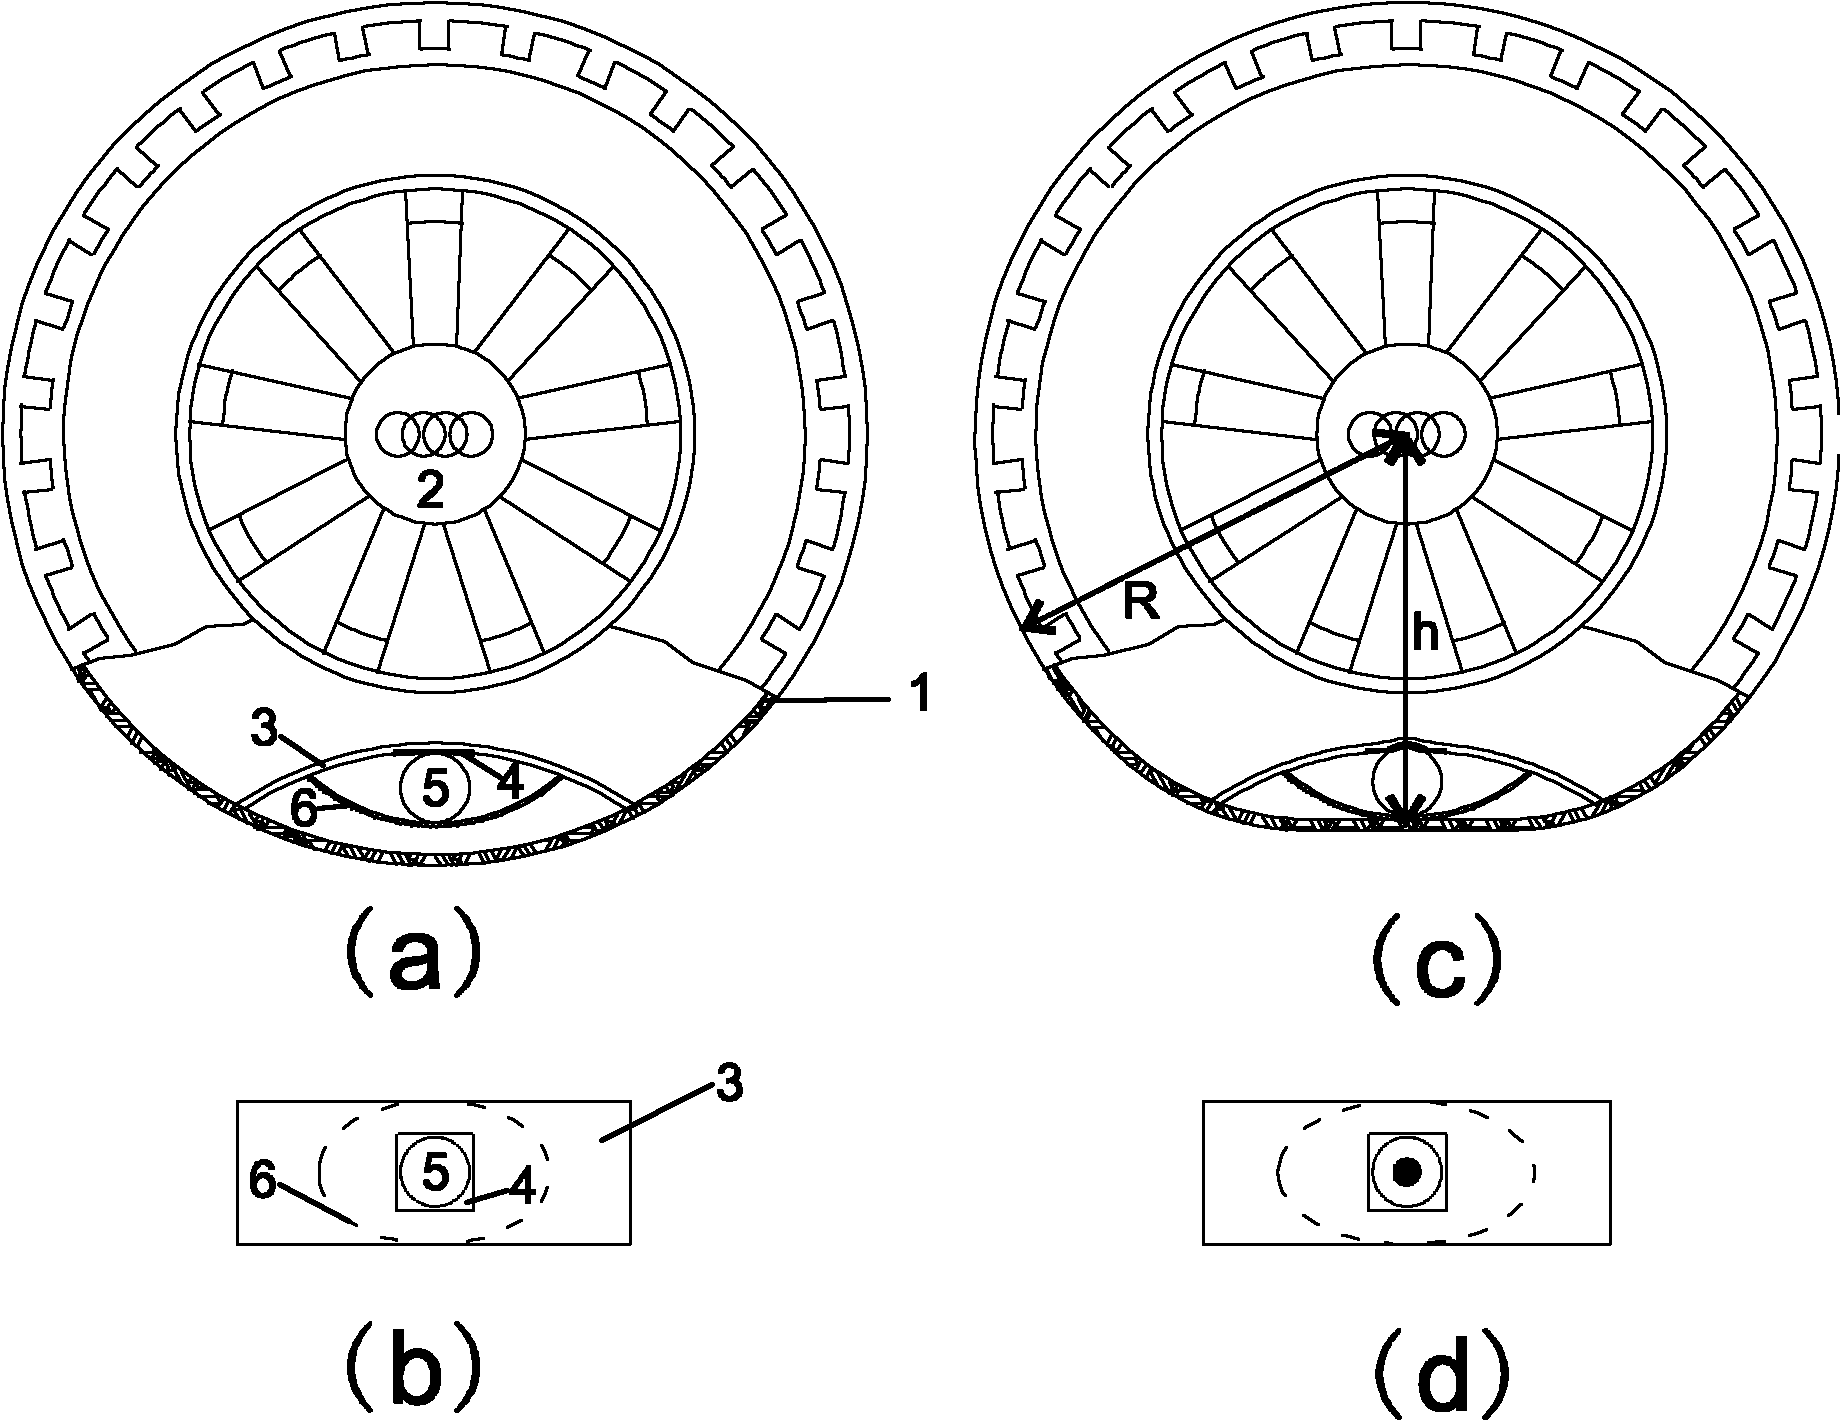 Automobile tire monitoring device based on organic piezoelectric material